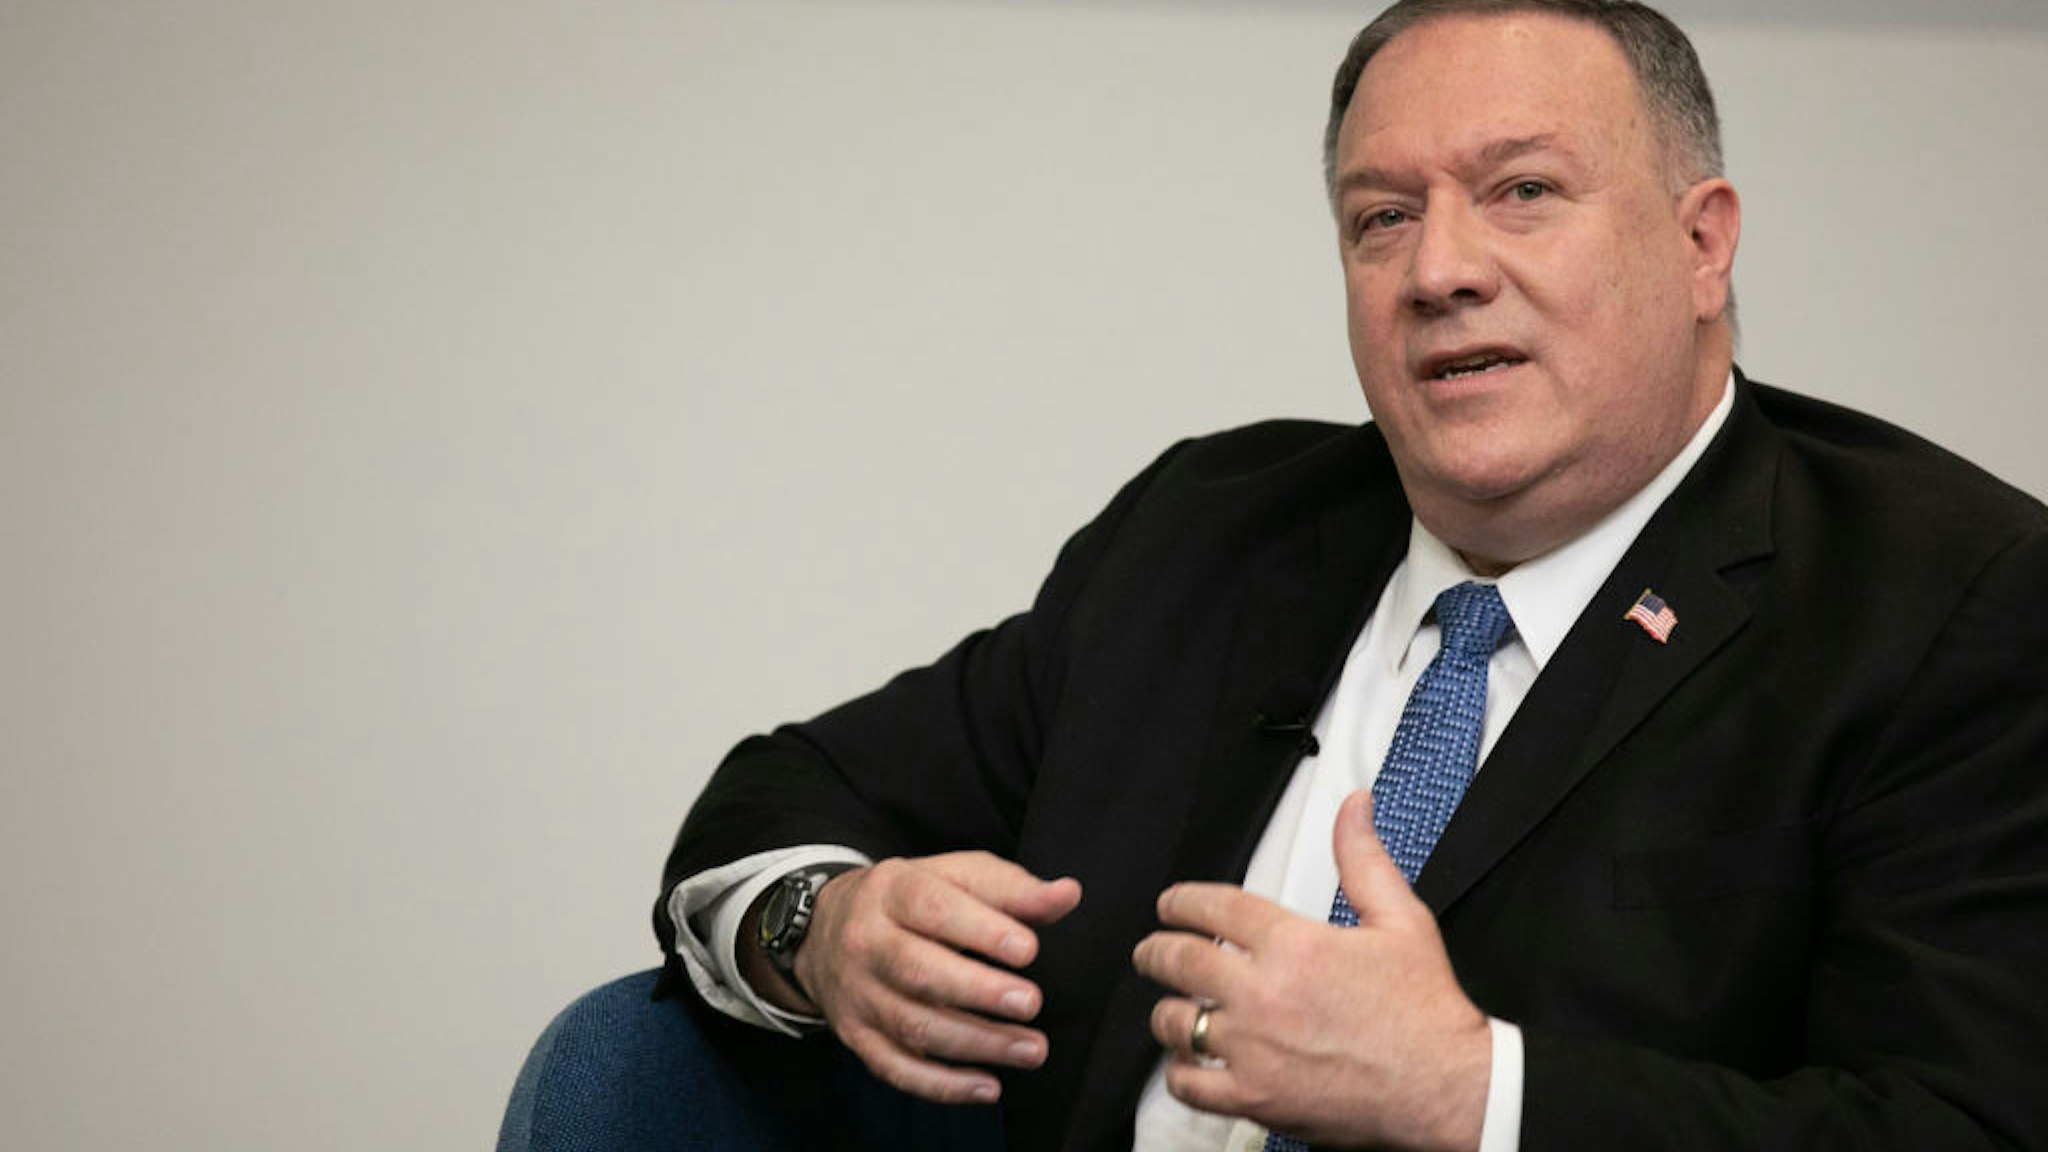 U.S. Secretary of State Mike Pompeo answers questions after giving on China foreign policy at Georgia Tech on December 9, 2020 in Atlanta, Georgia.